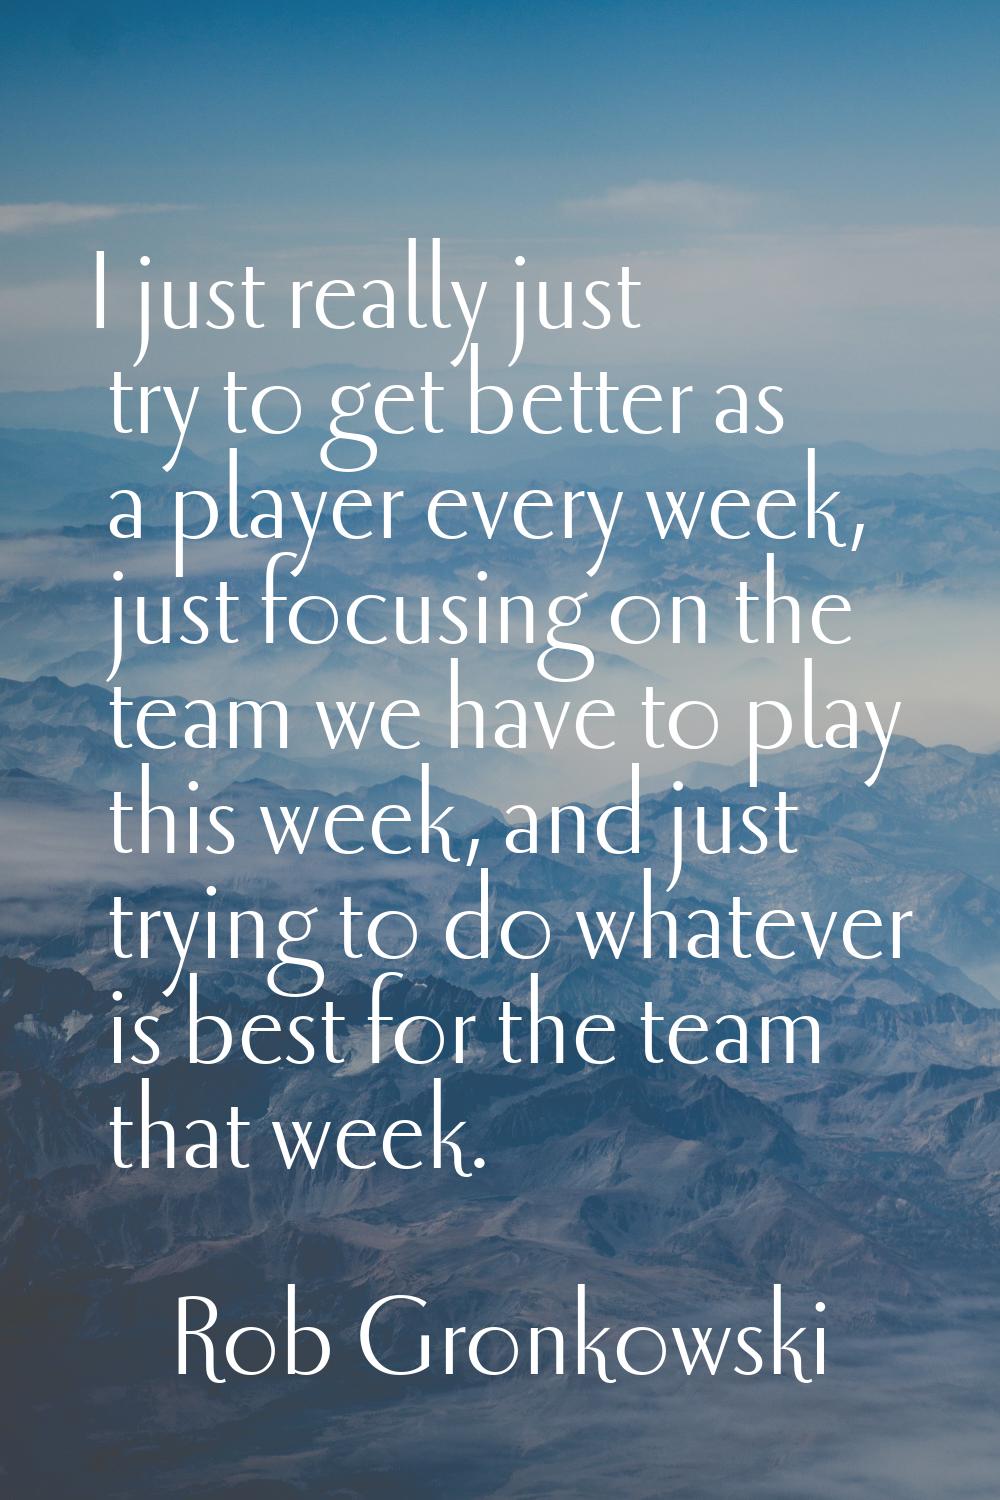 I just really just try to get better as a player every week, just focusing on the team we have to p